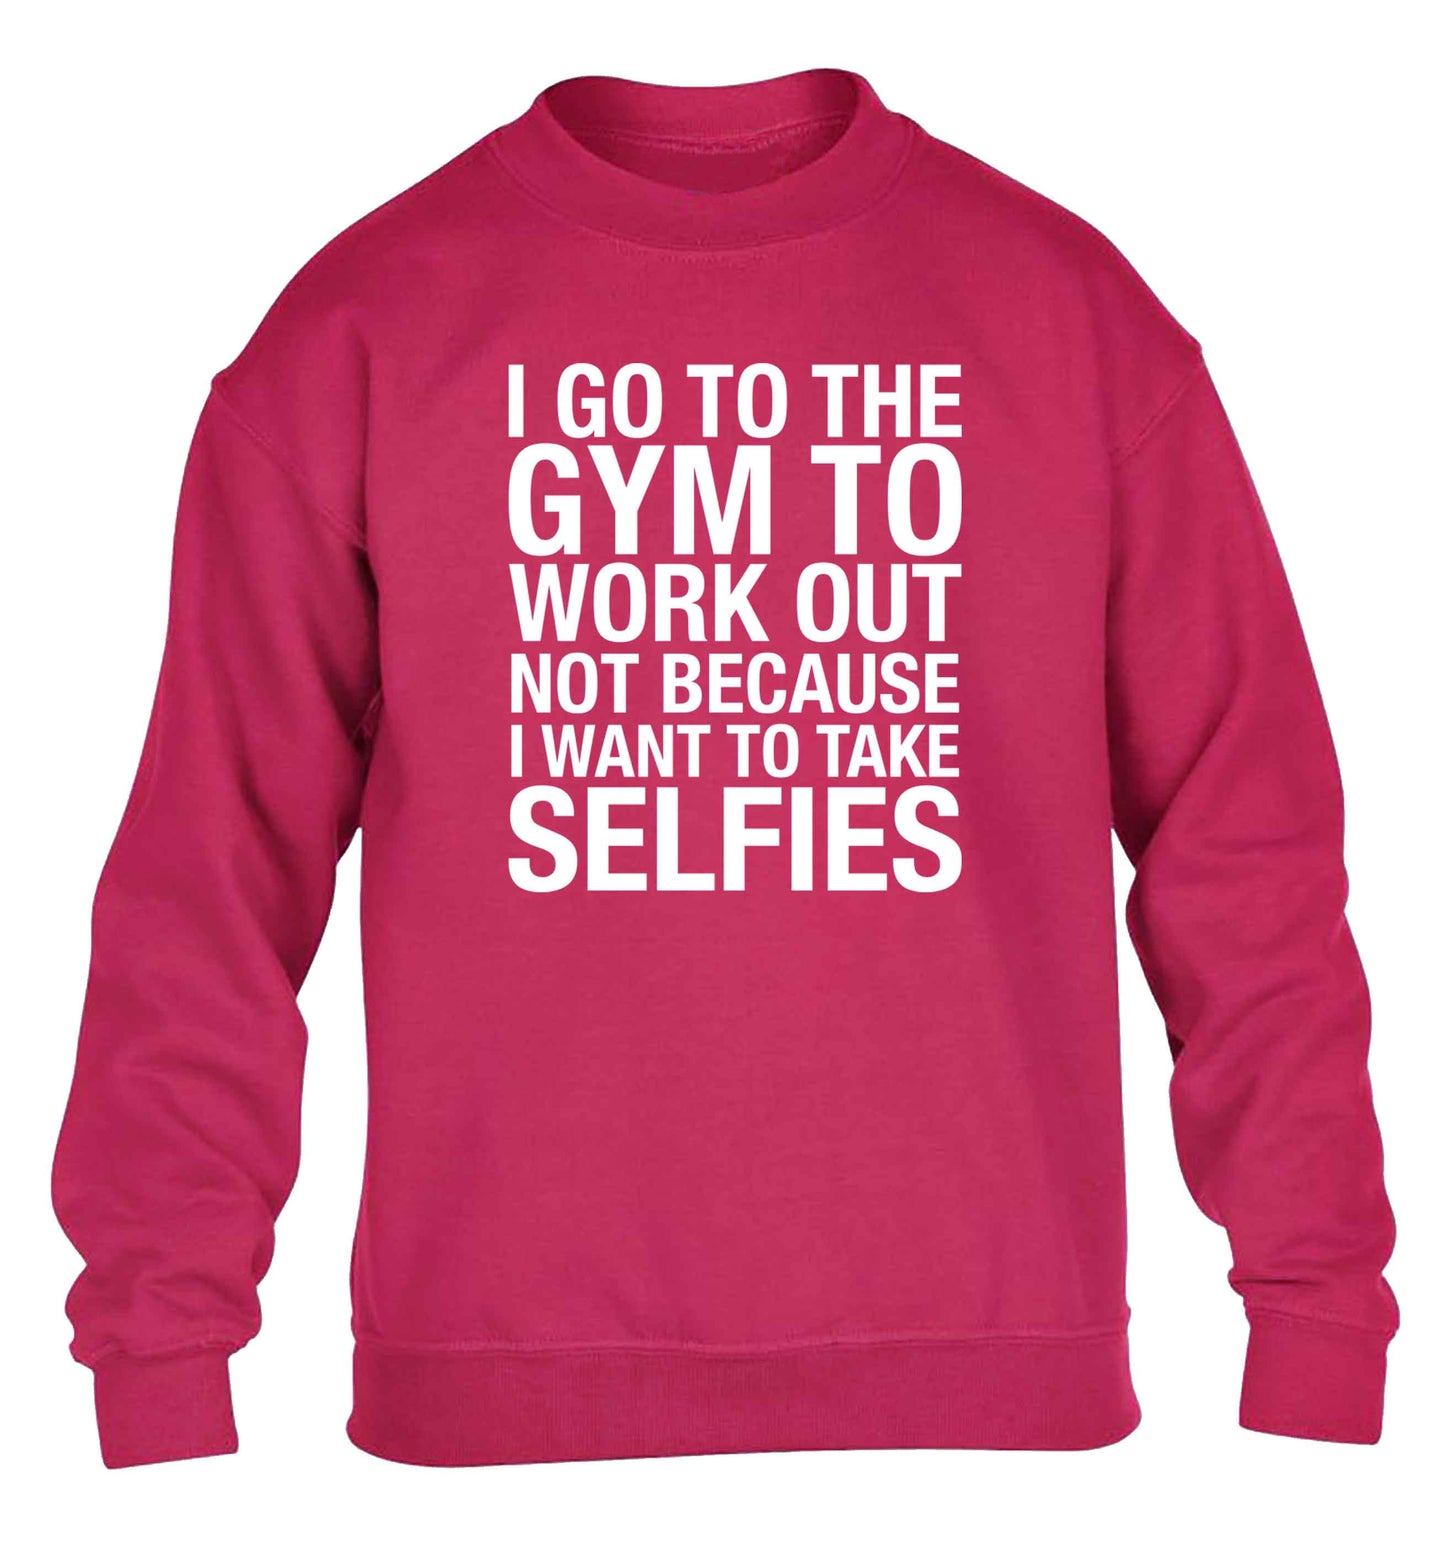 I go to the gym to workout not to take selfies children's pink sweater 12-13 Years